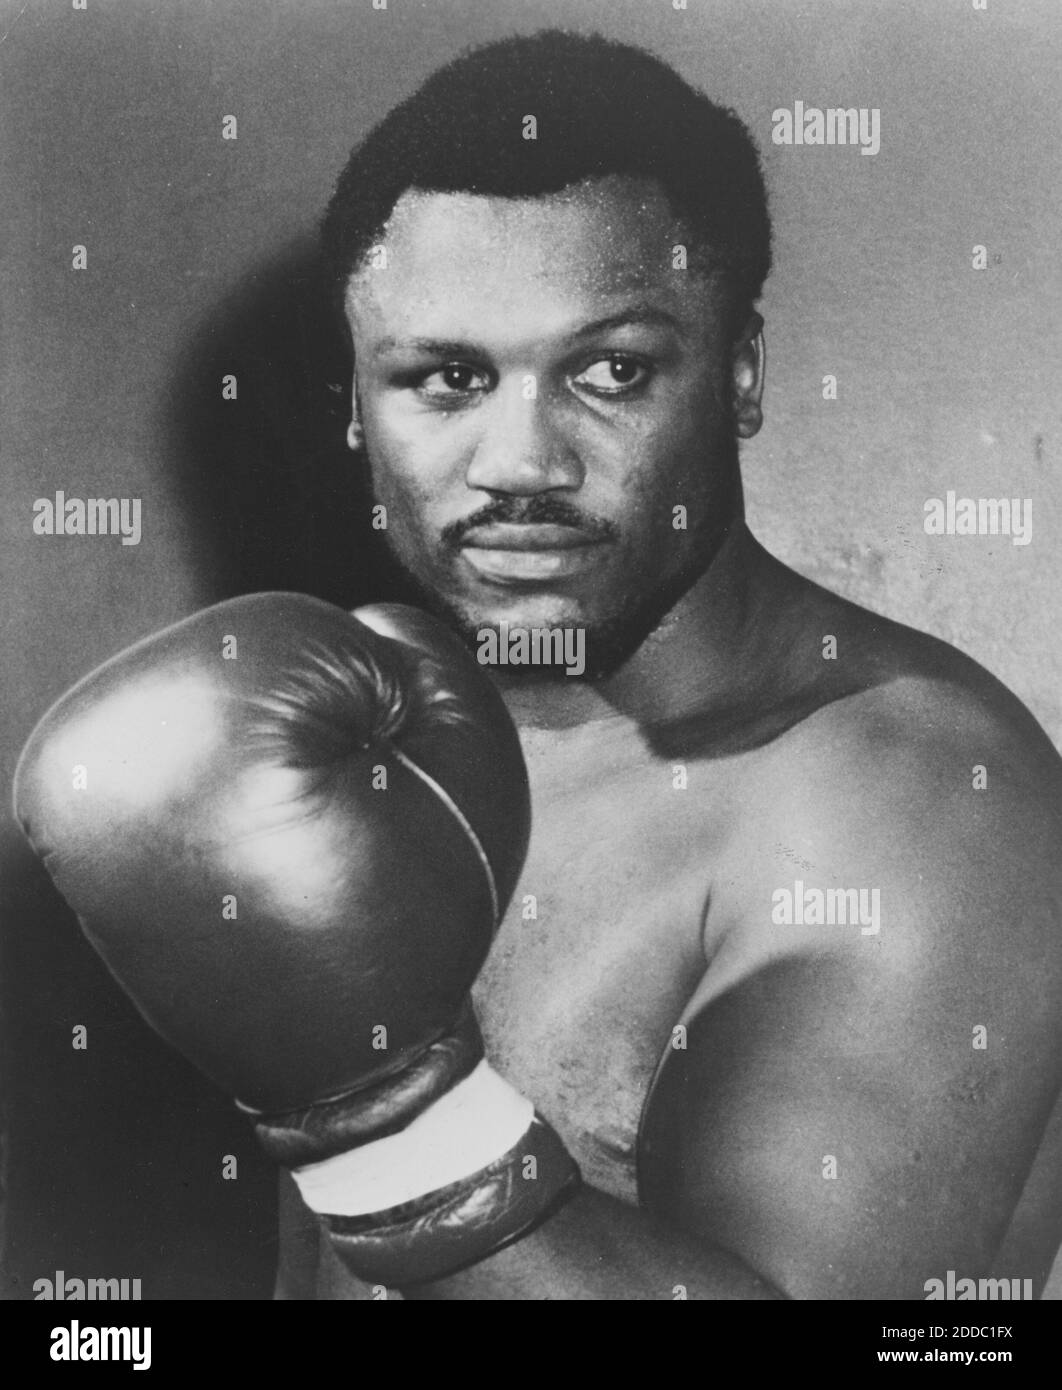 NO FILM, NO VIDEO, NO TV, NO DOCUMENTARY - In this undated file photo, Joe Frazier poses for a photo. Frazier, the former heavyweight champion, has died. He was 67. Photo by Philadelphia Daily News/MCT/ABACAPRESS.COM Stock Photo